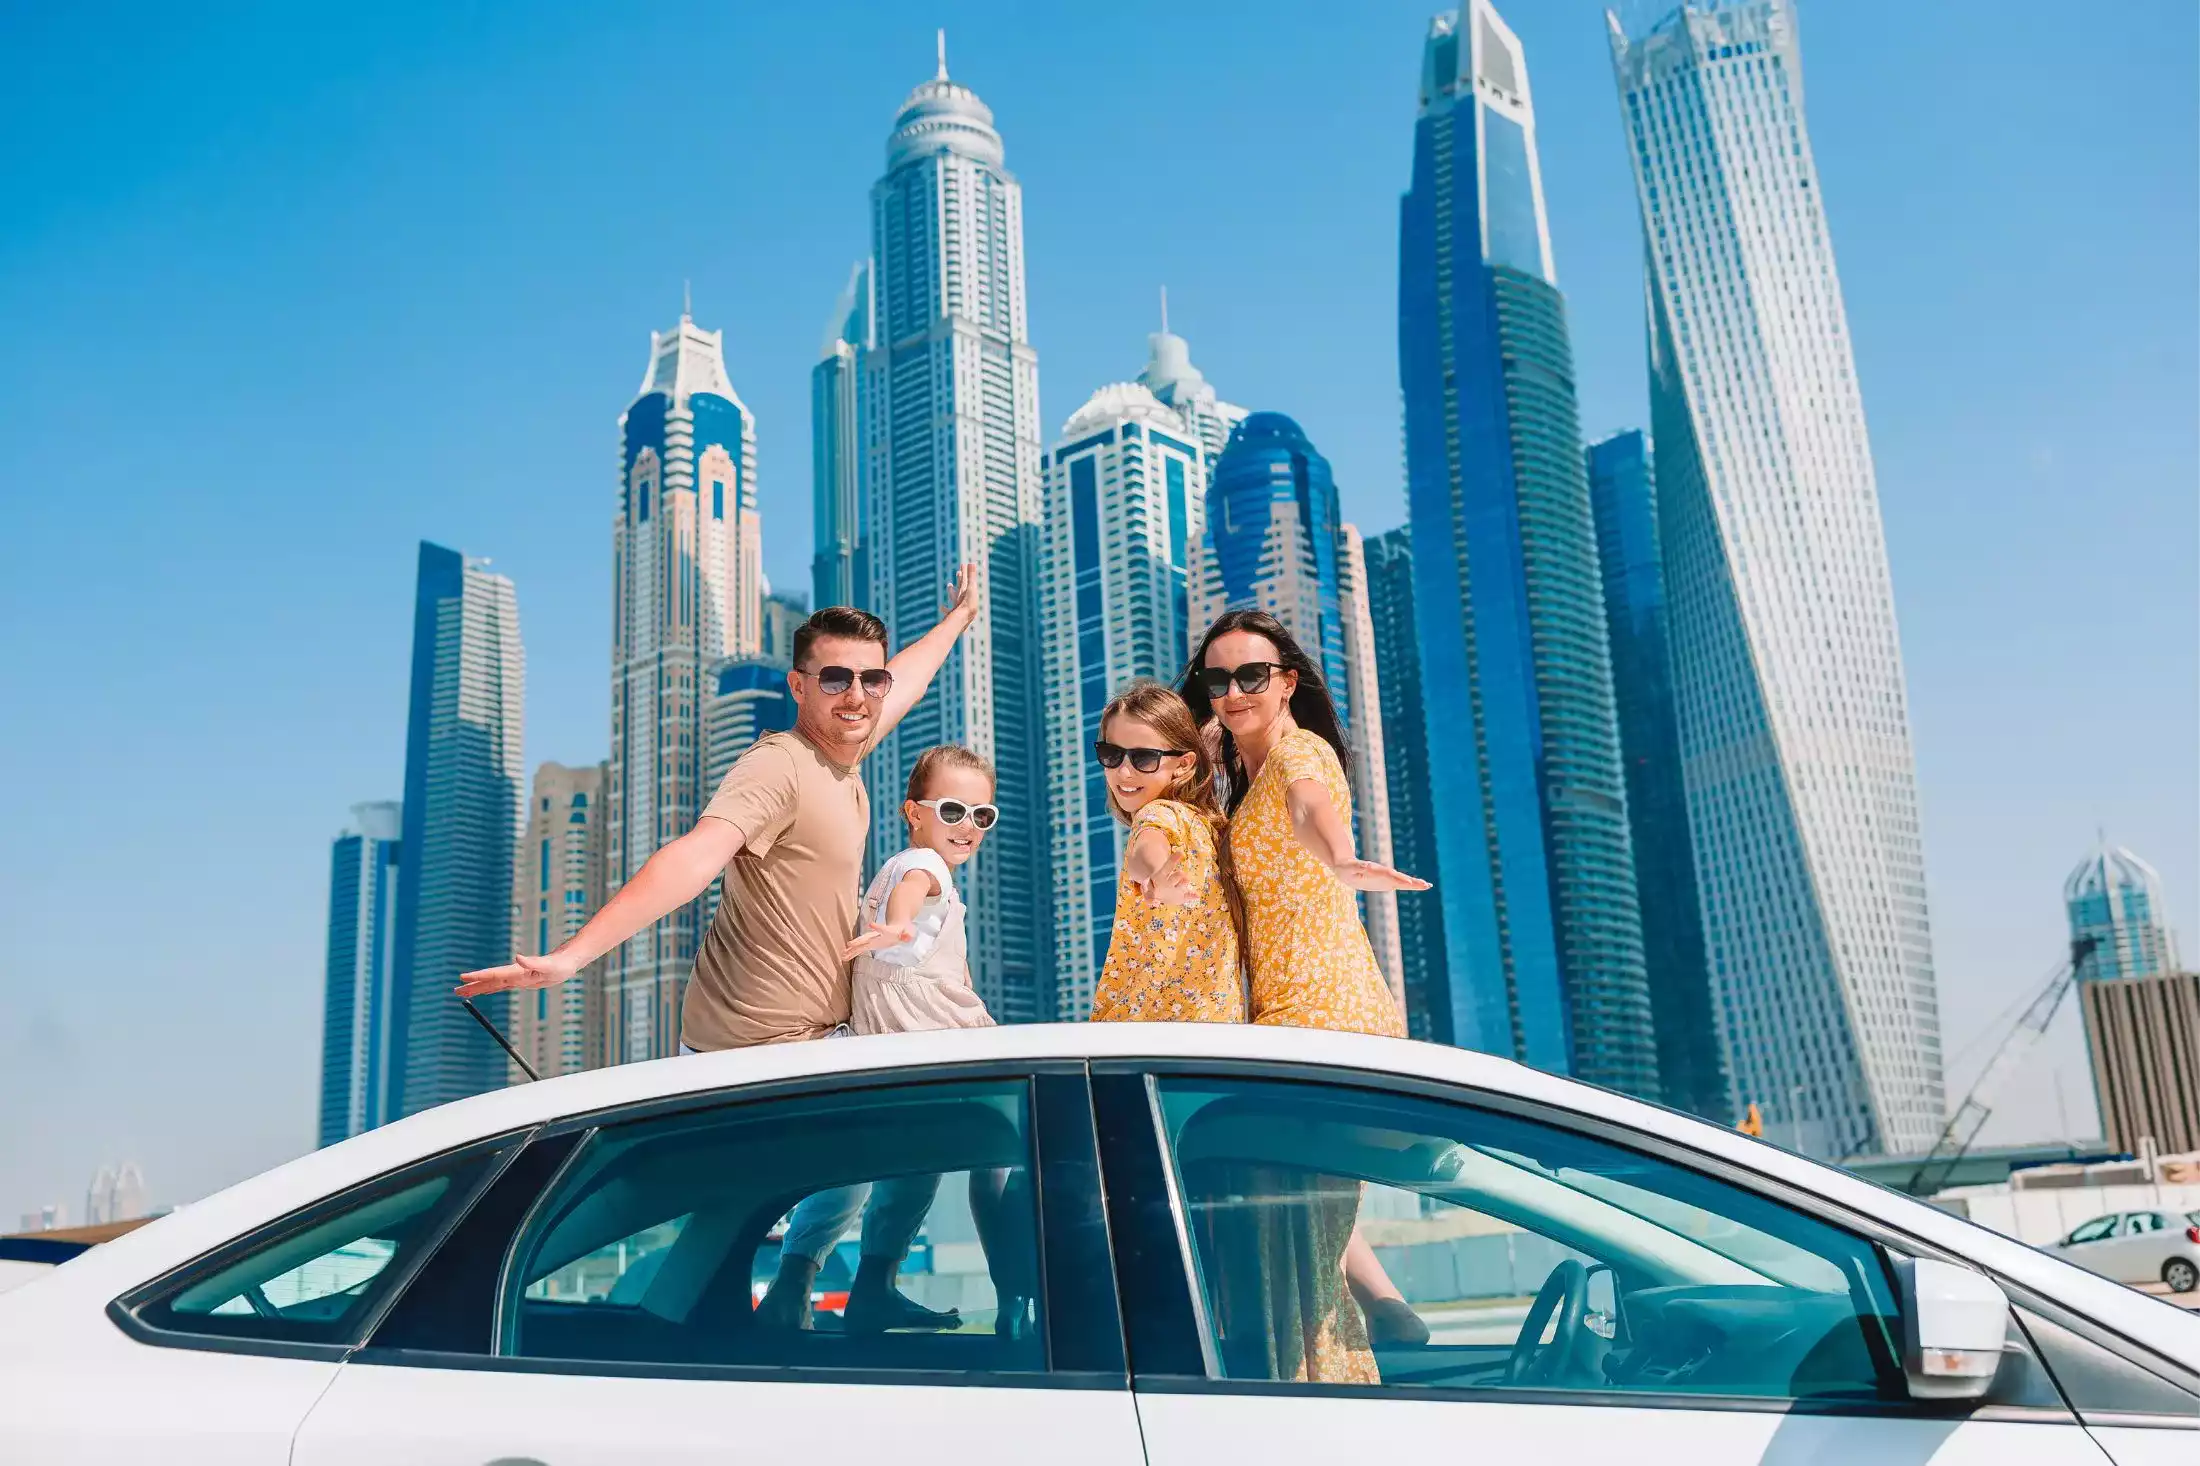 Family having great time on a sunny day in Dubai